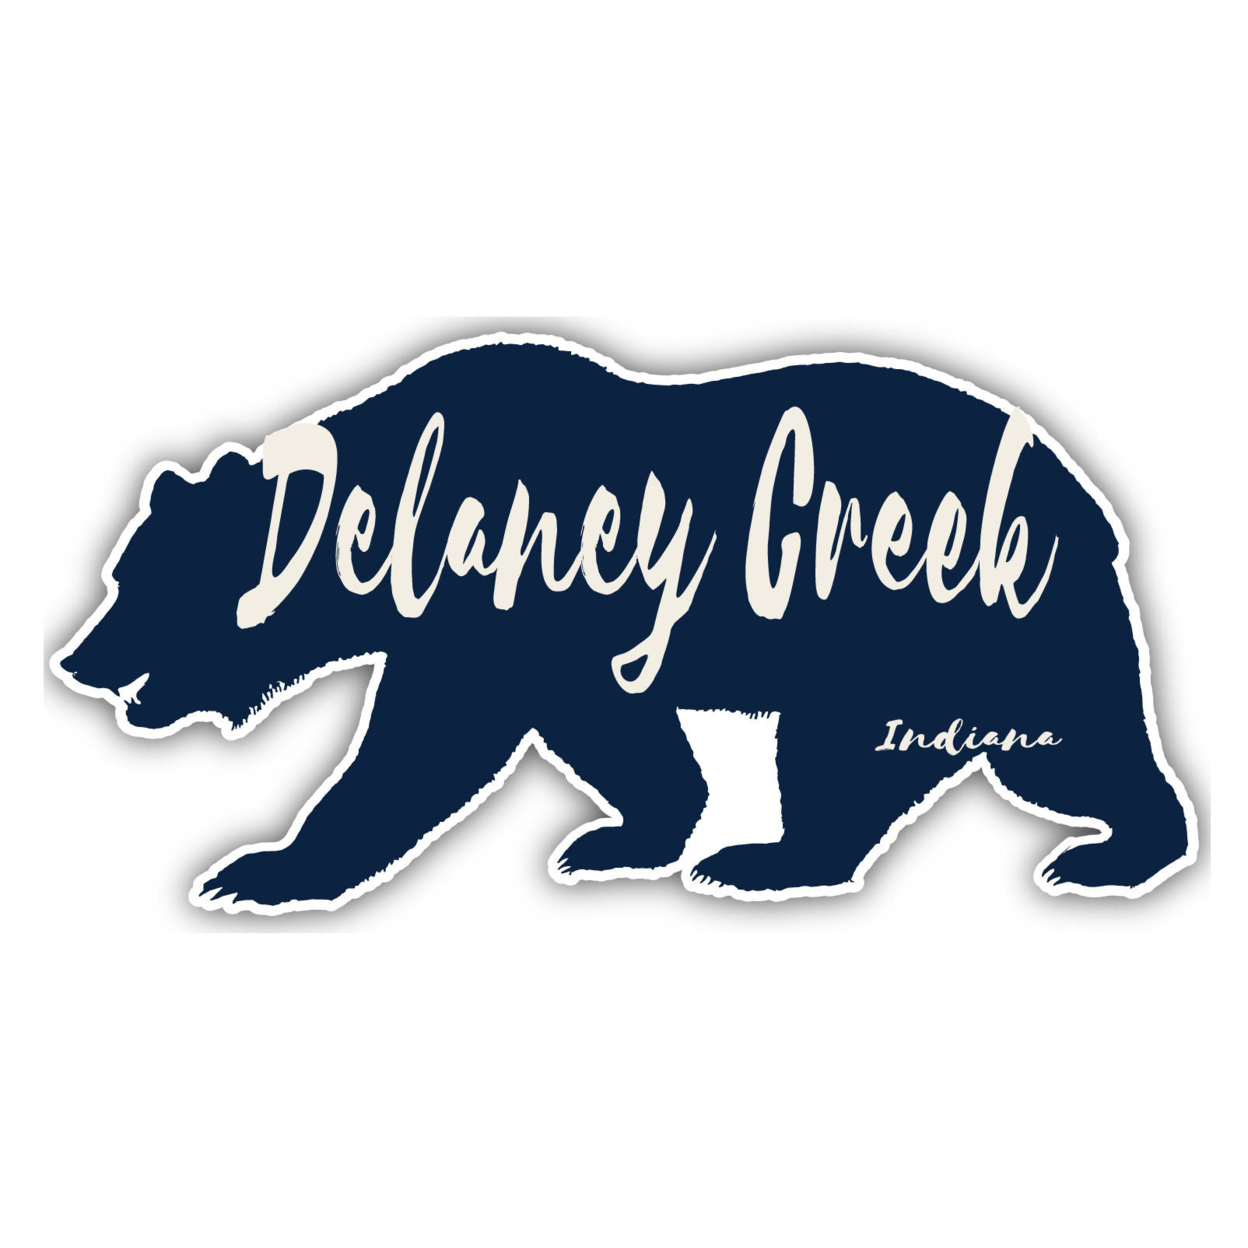 Delaney Creek Indiana Souvenir Decorative Stickers (Choose Theme And Size) - 4-Pack, 4-Inch, Bear